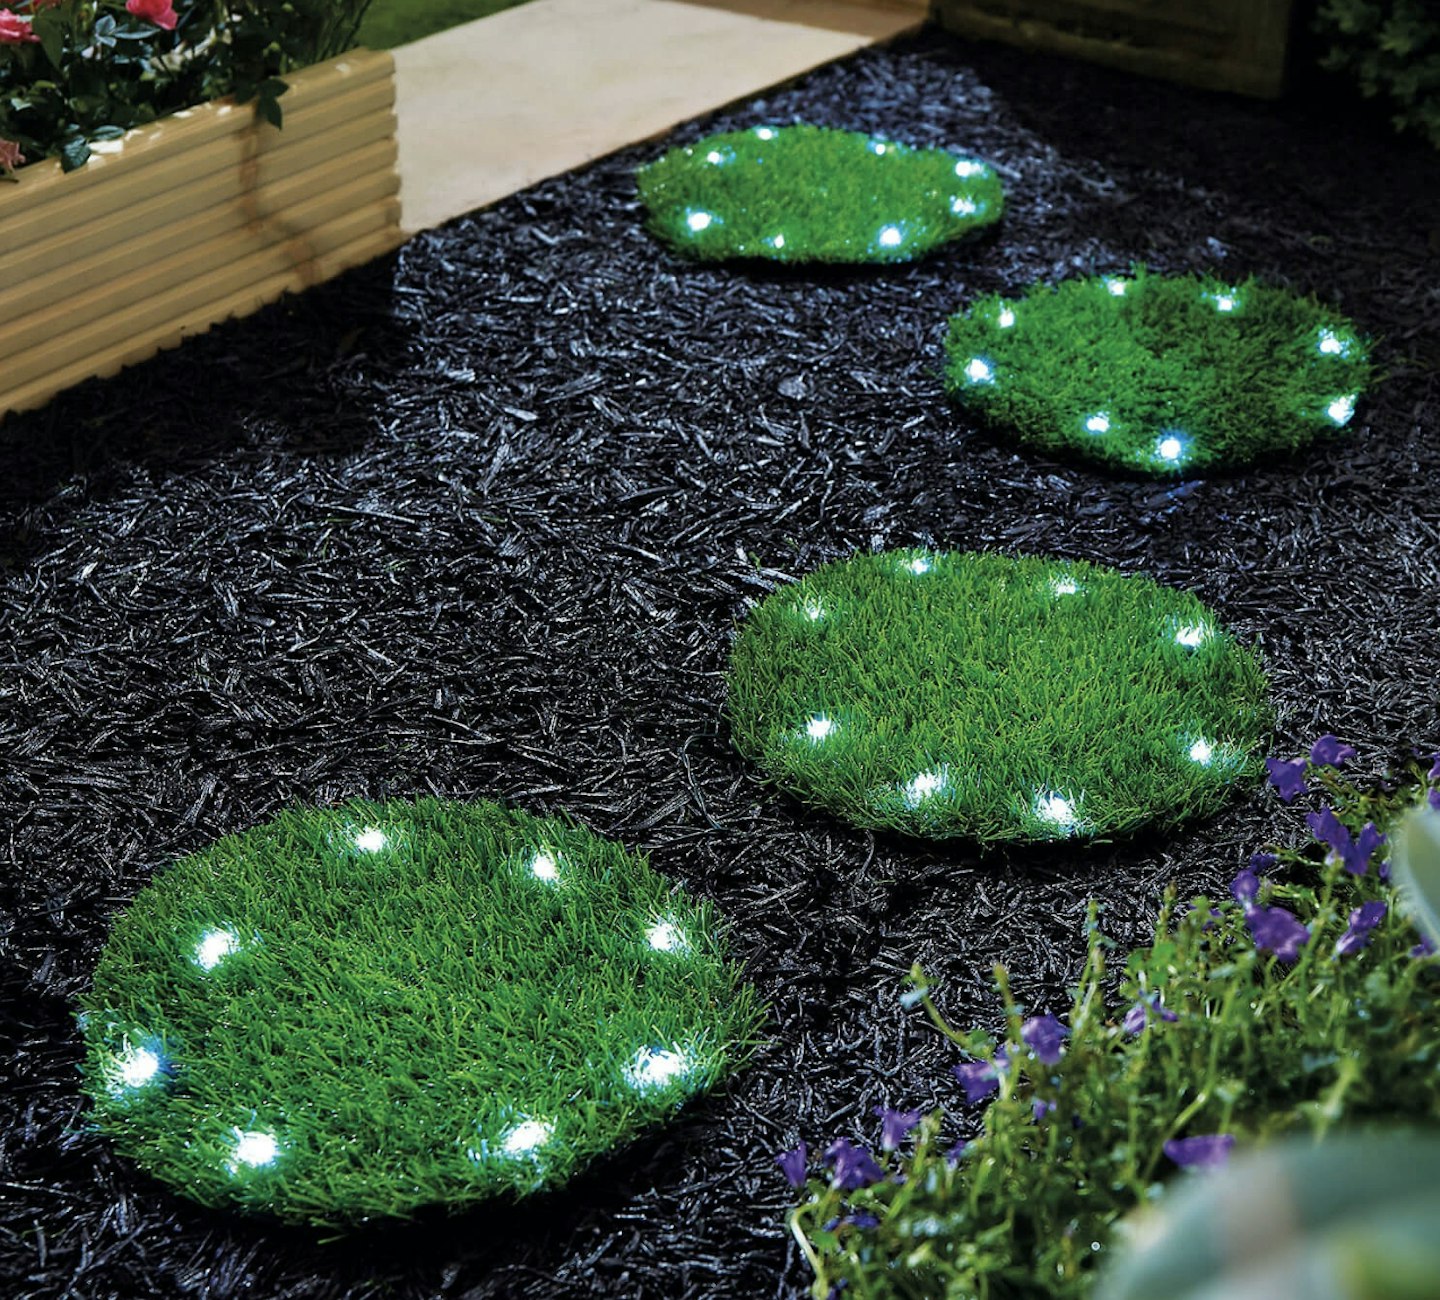 Pack of 4 Solar Grass Stepping-Stones - Buy 2 & Save £5